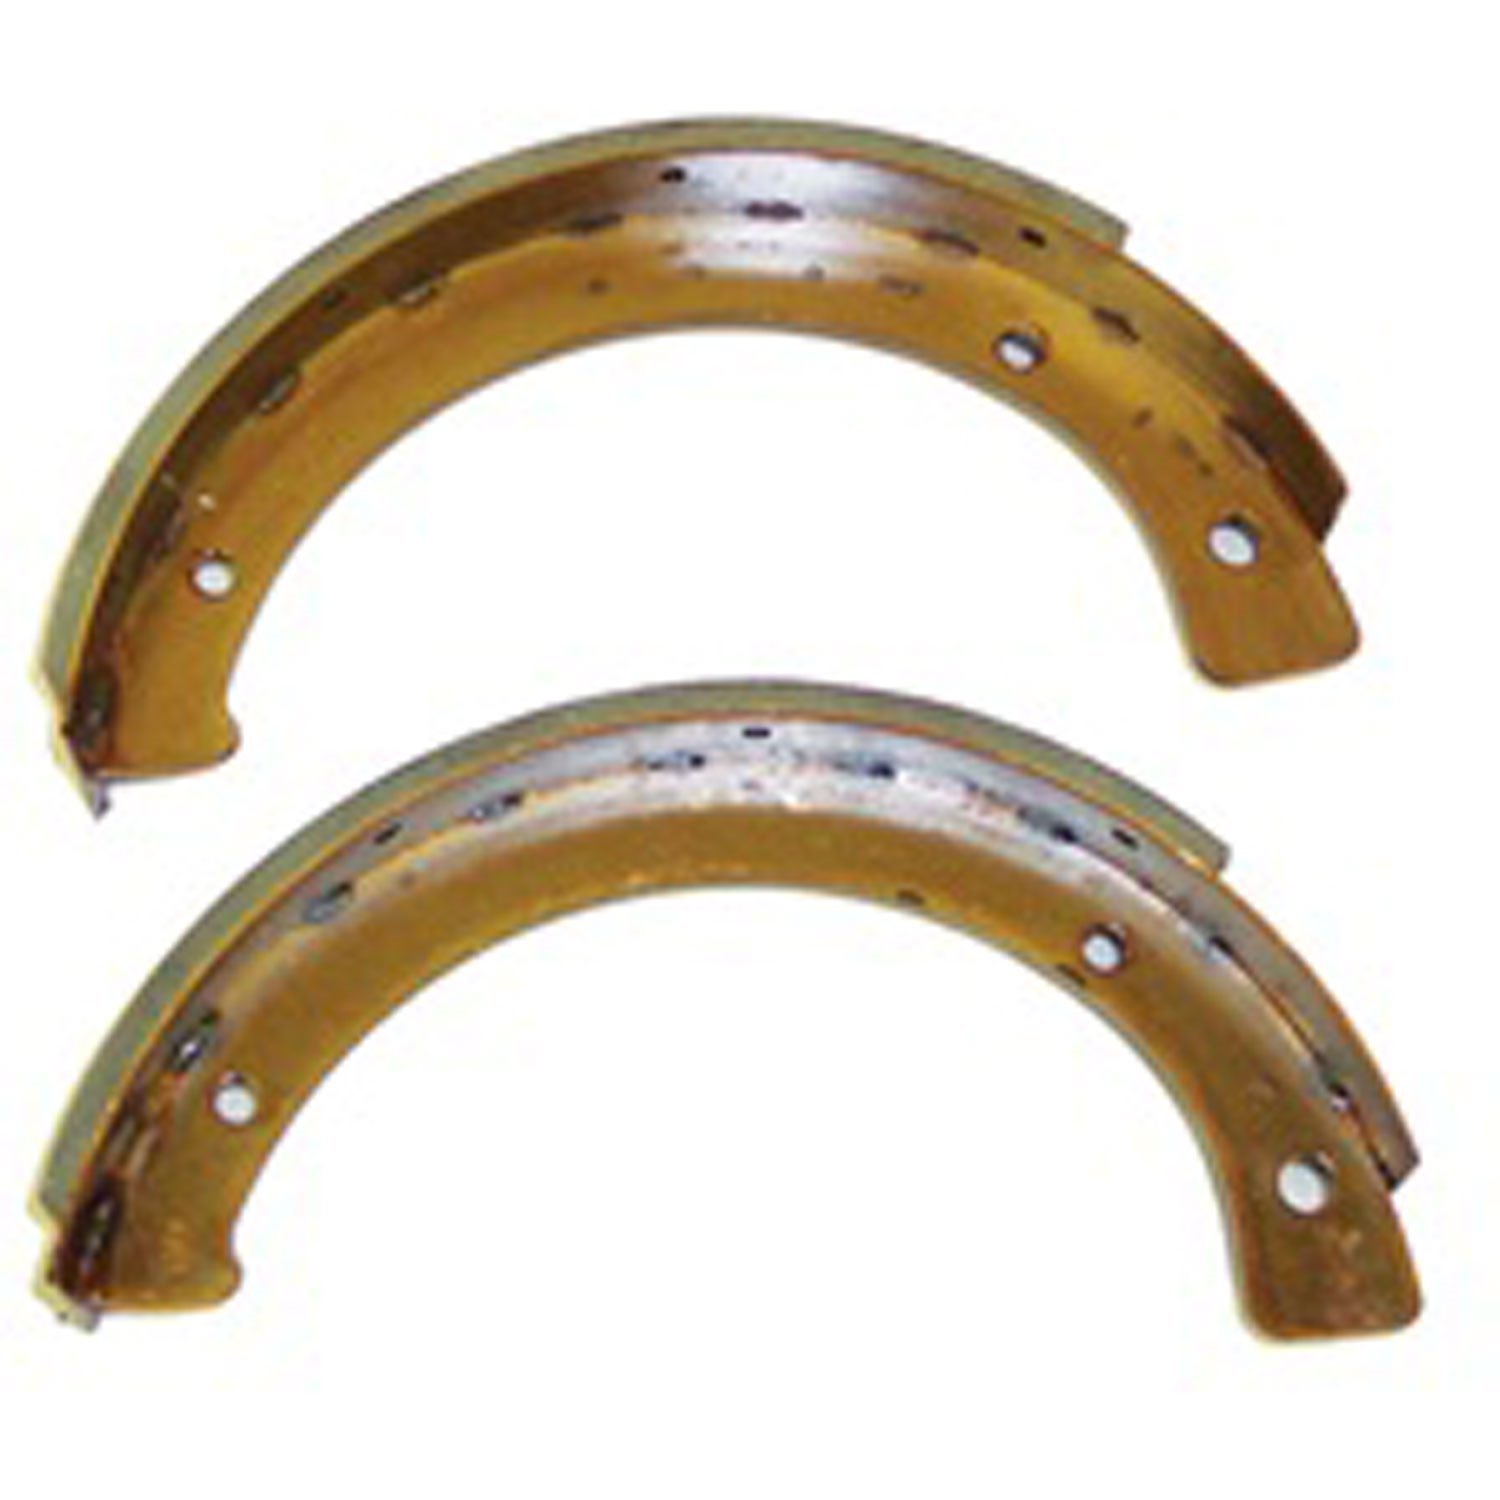 This pair of original-style emergency brake shoes from Omix-ADA fits 41-45 Willys MB Ford GPW 46-66